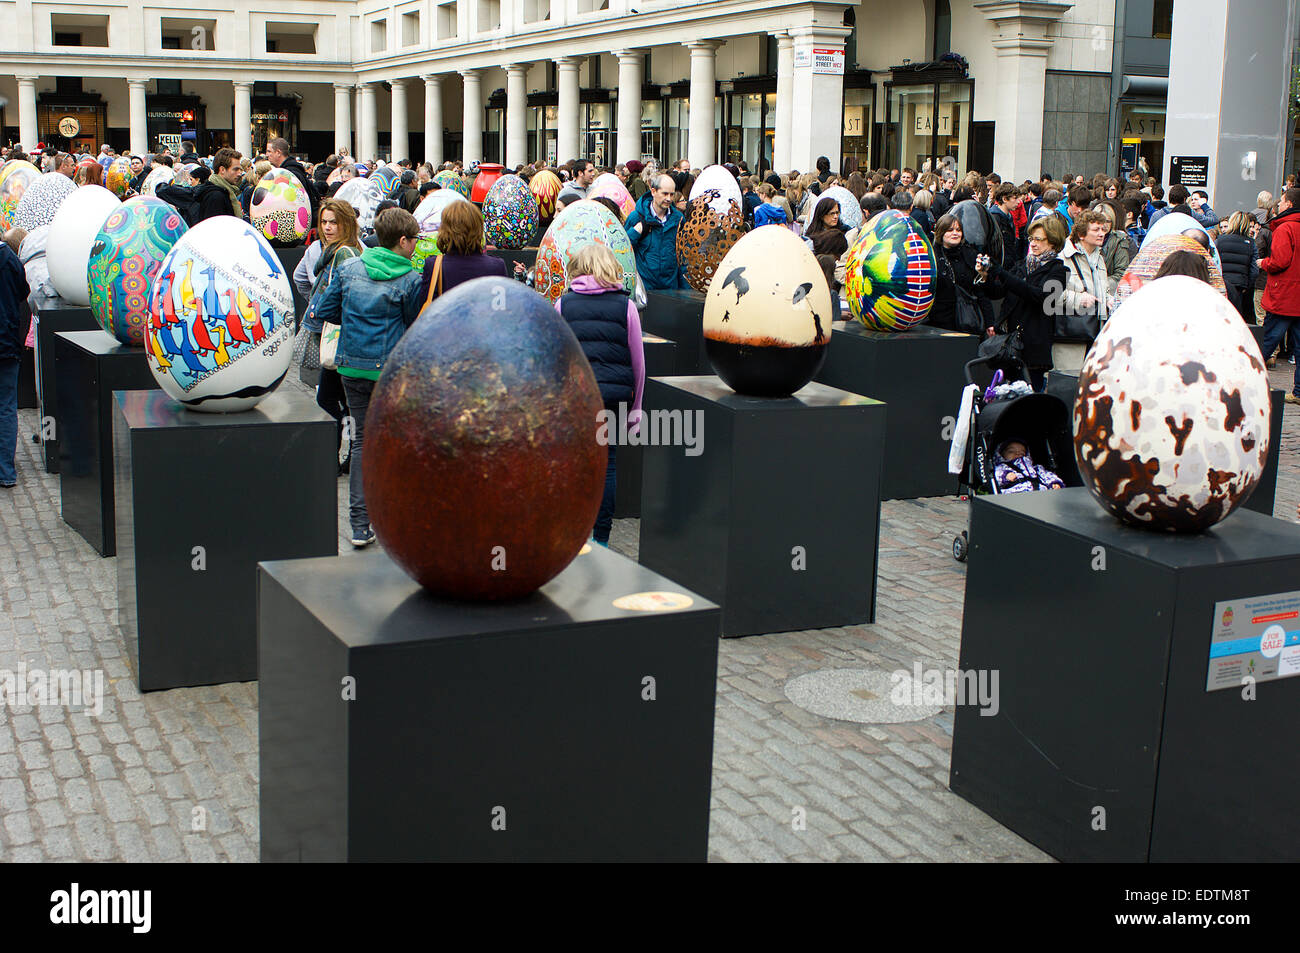 For Easter week, all the eggs in the (Fabergé) Big Egg Hunt were brought together in Covent Garden so you could see them al. Stock Photo